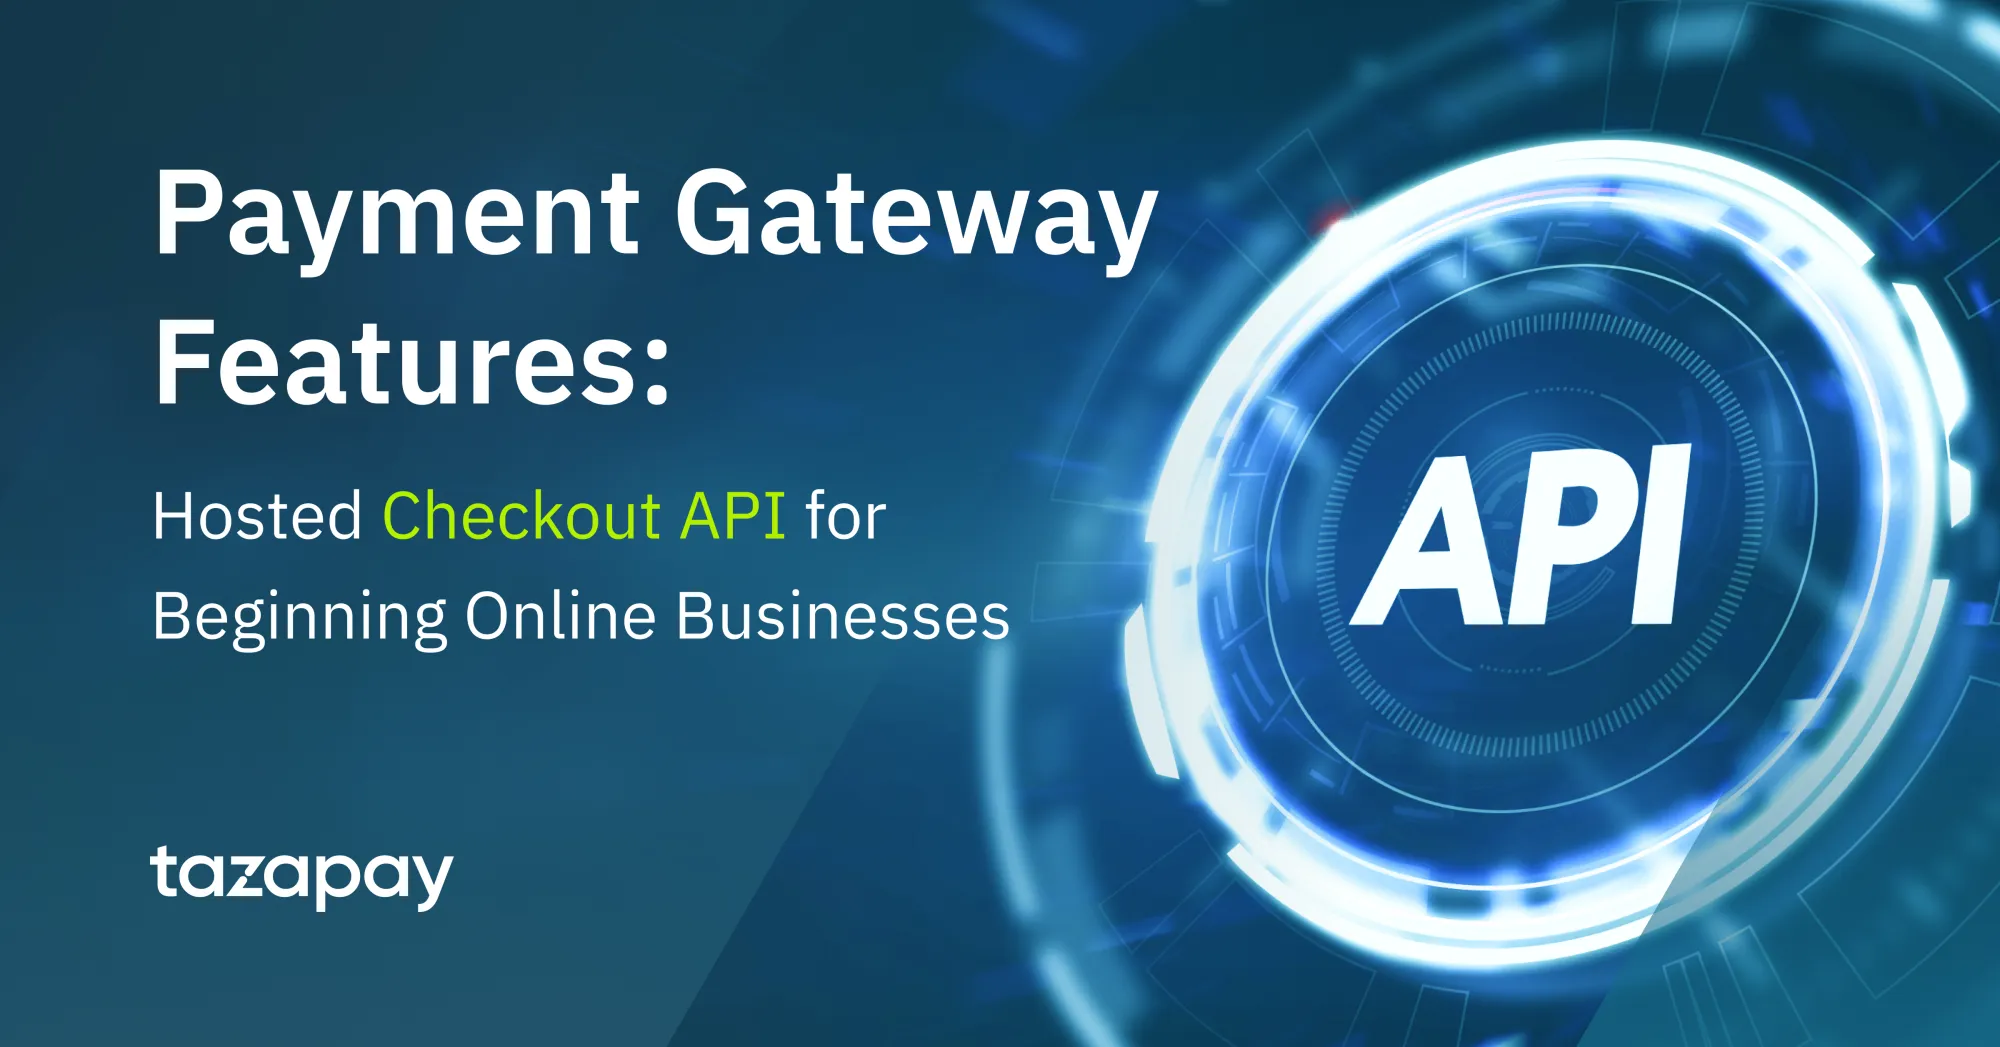 Payment Gateway Features: Hosted Checkout API for Beginning Online Businesses